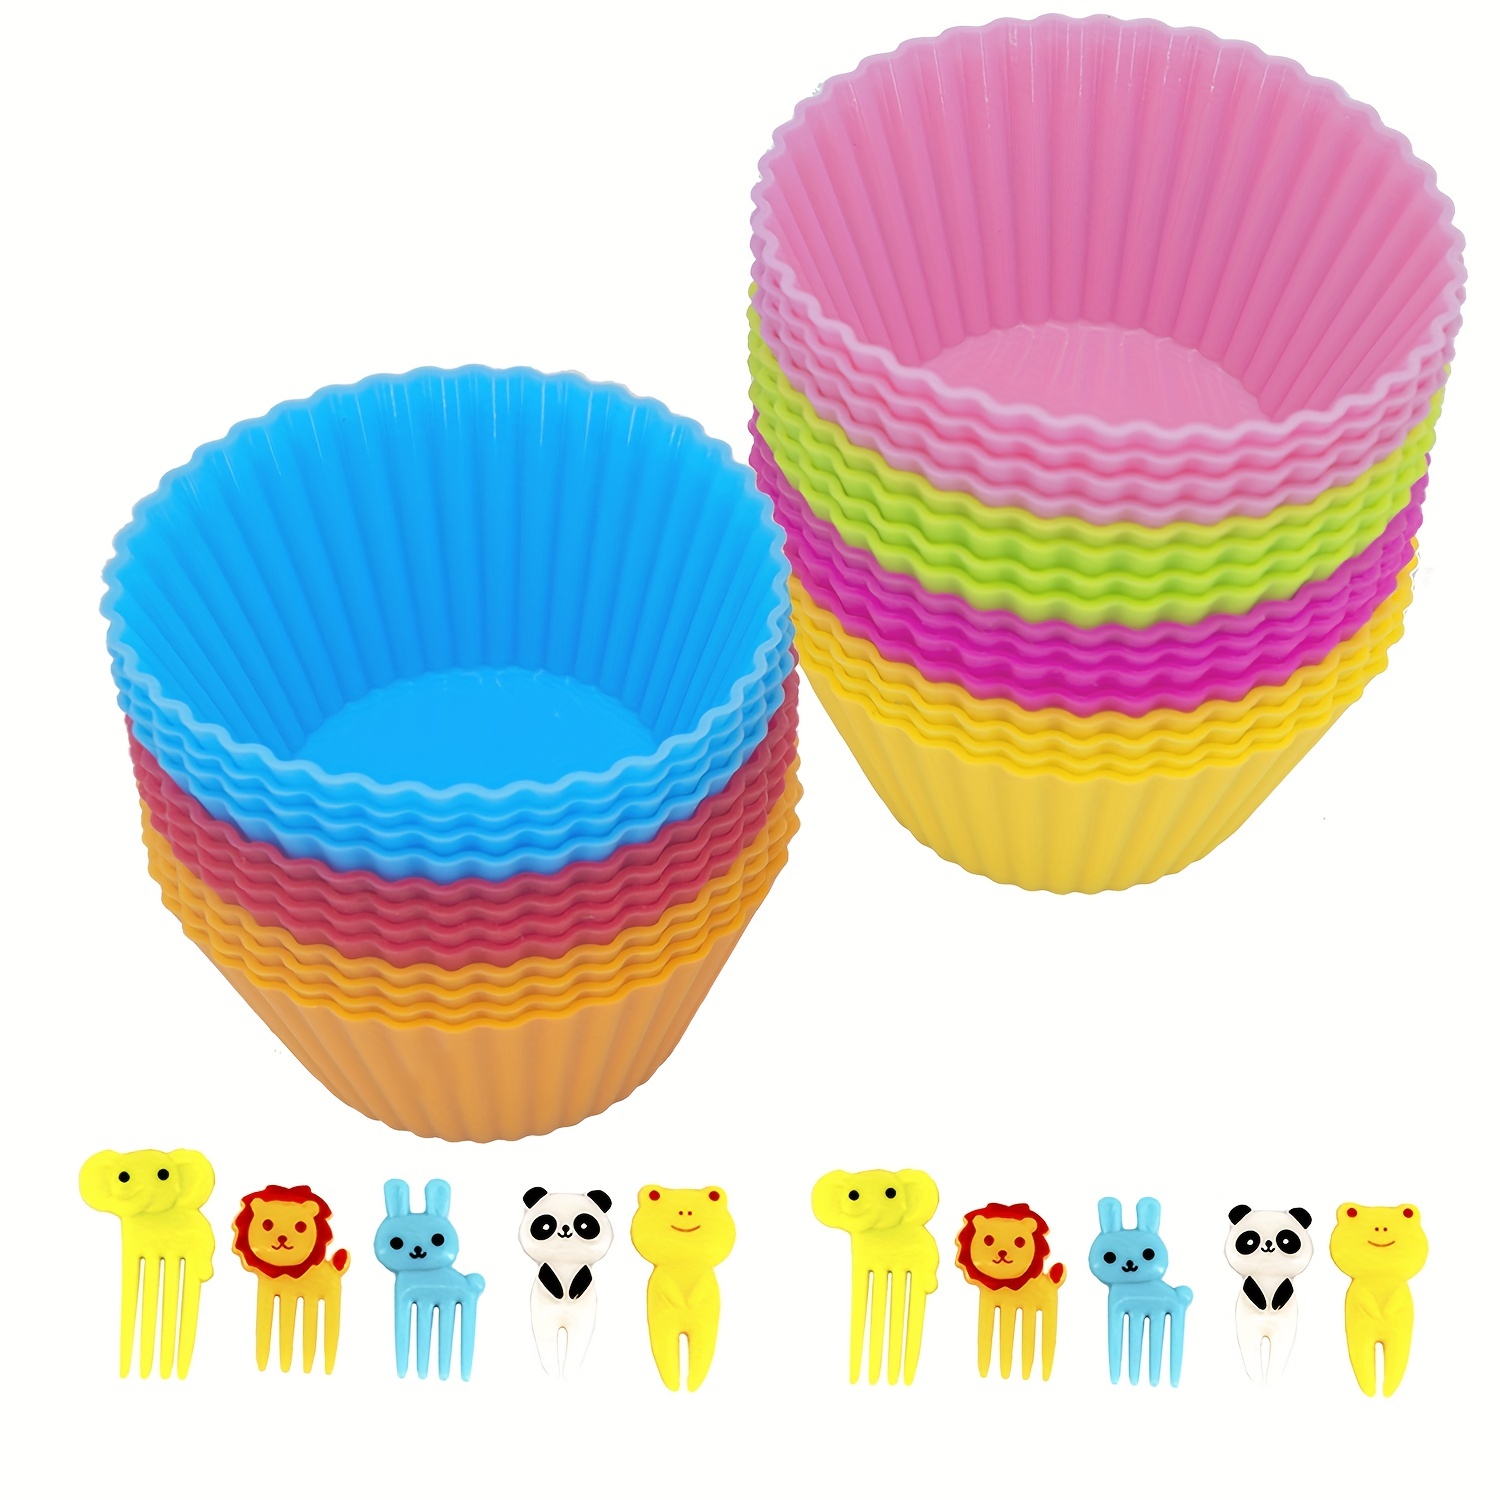 To encounter Silicone Cupcake Liners, Reusable Silicone Baking